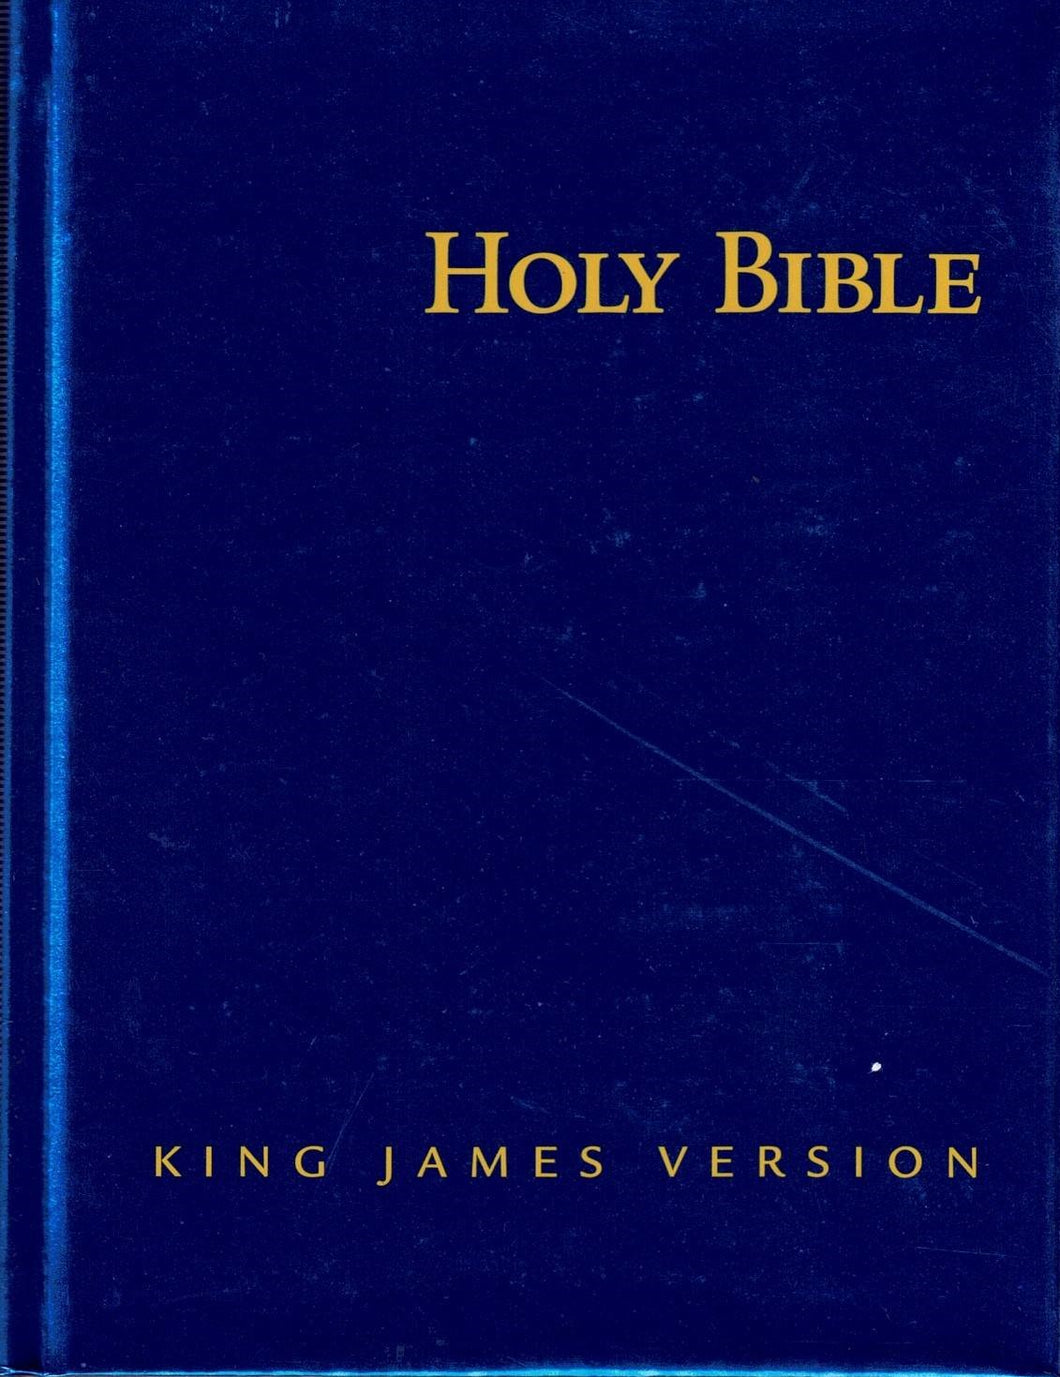 Holy Bible - Study Edition hardcover